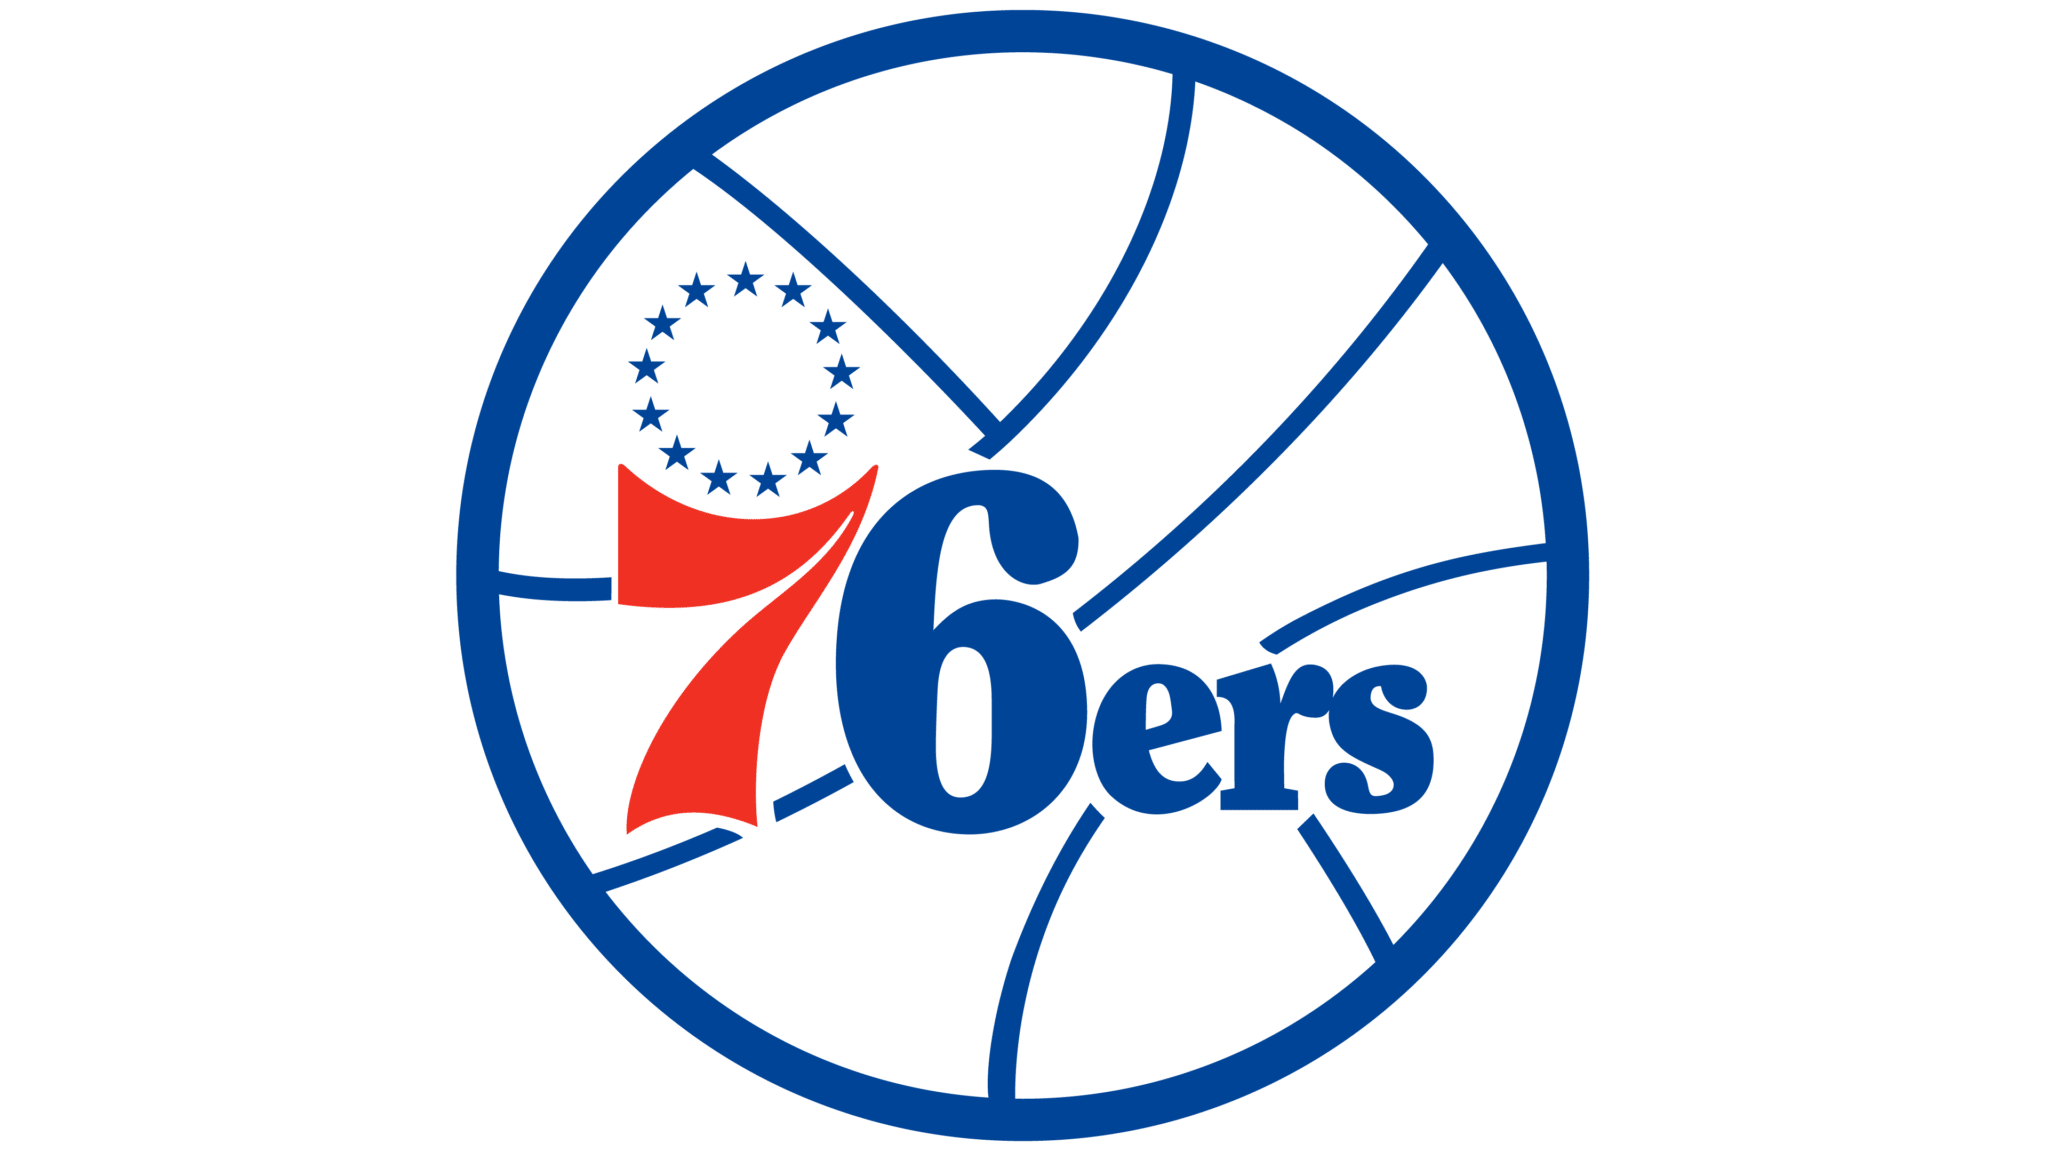 This is What the Sixers Are Sending to Ticket Holders: